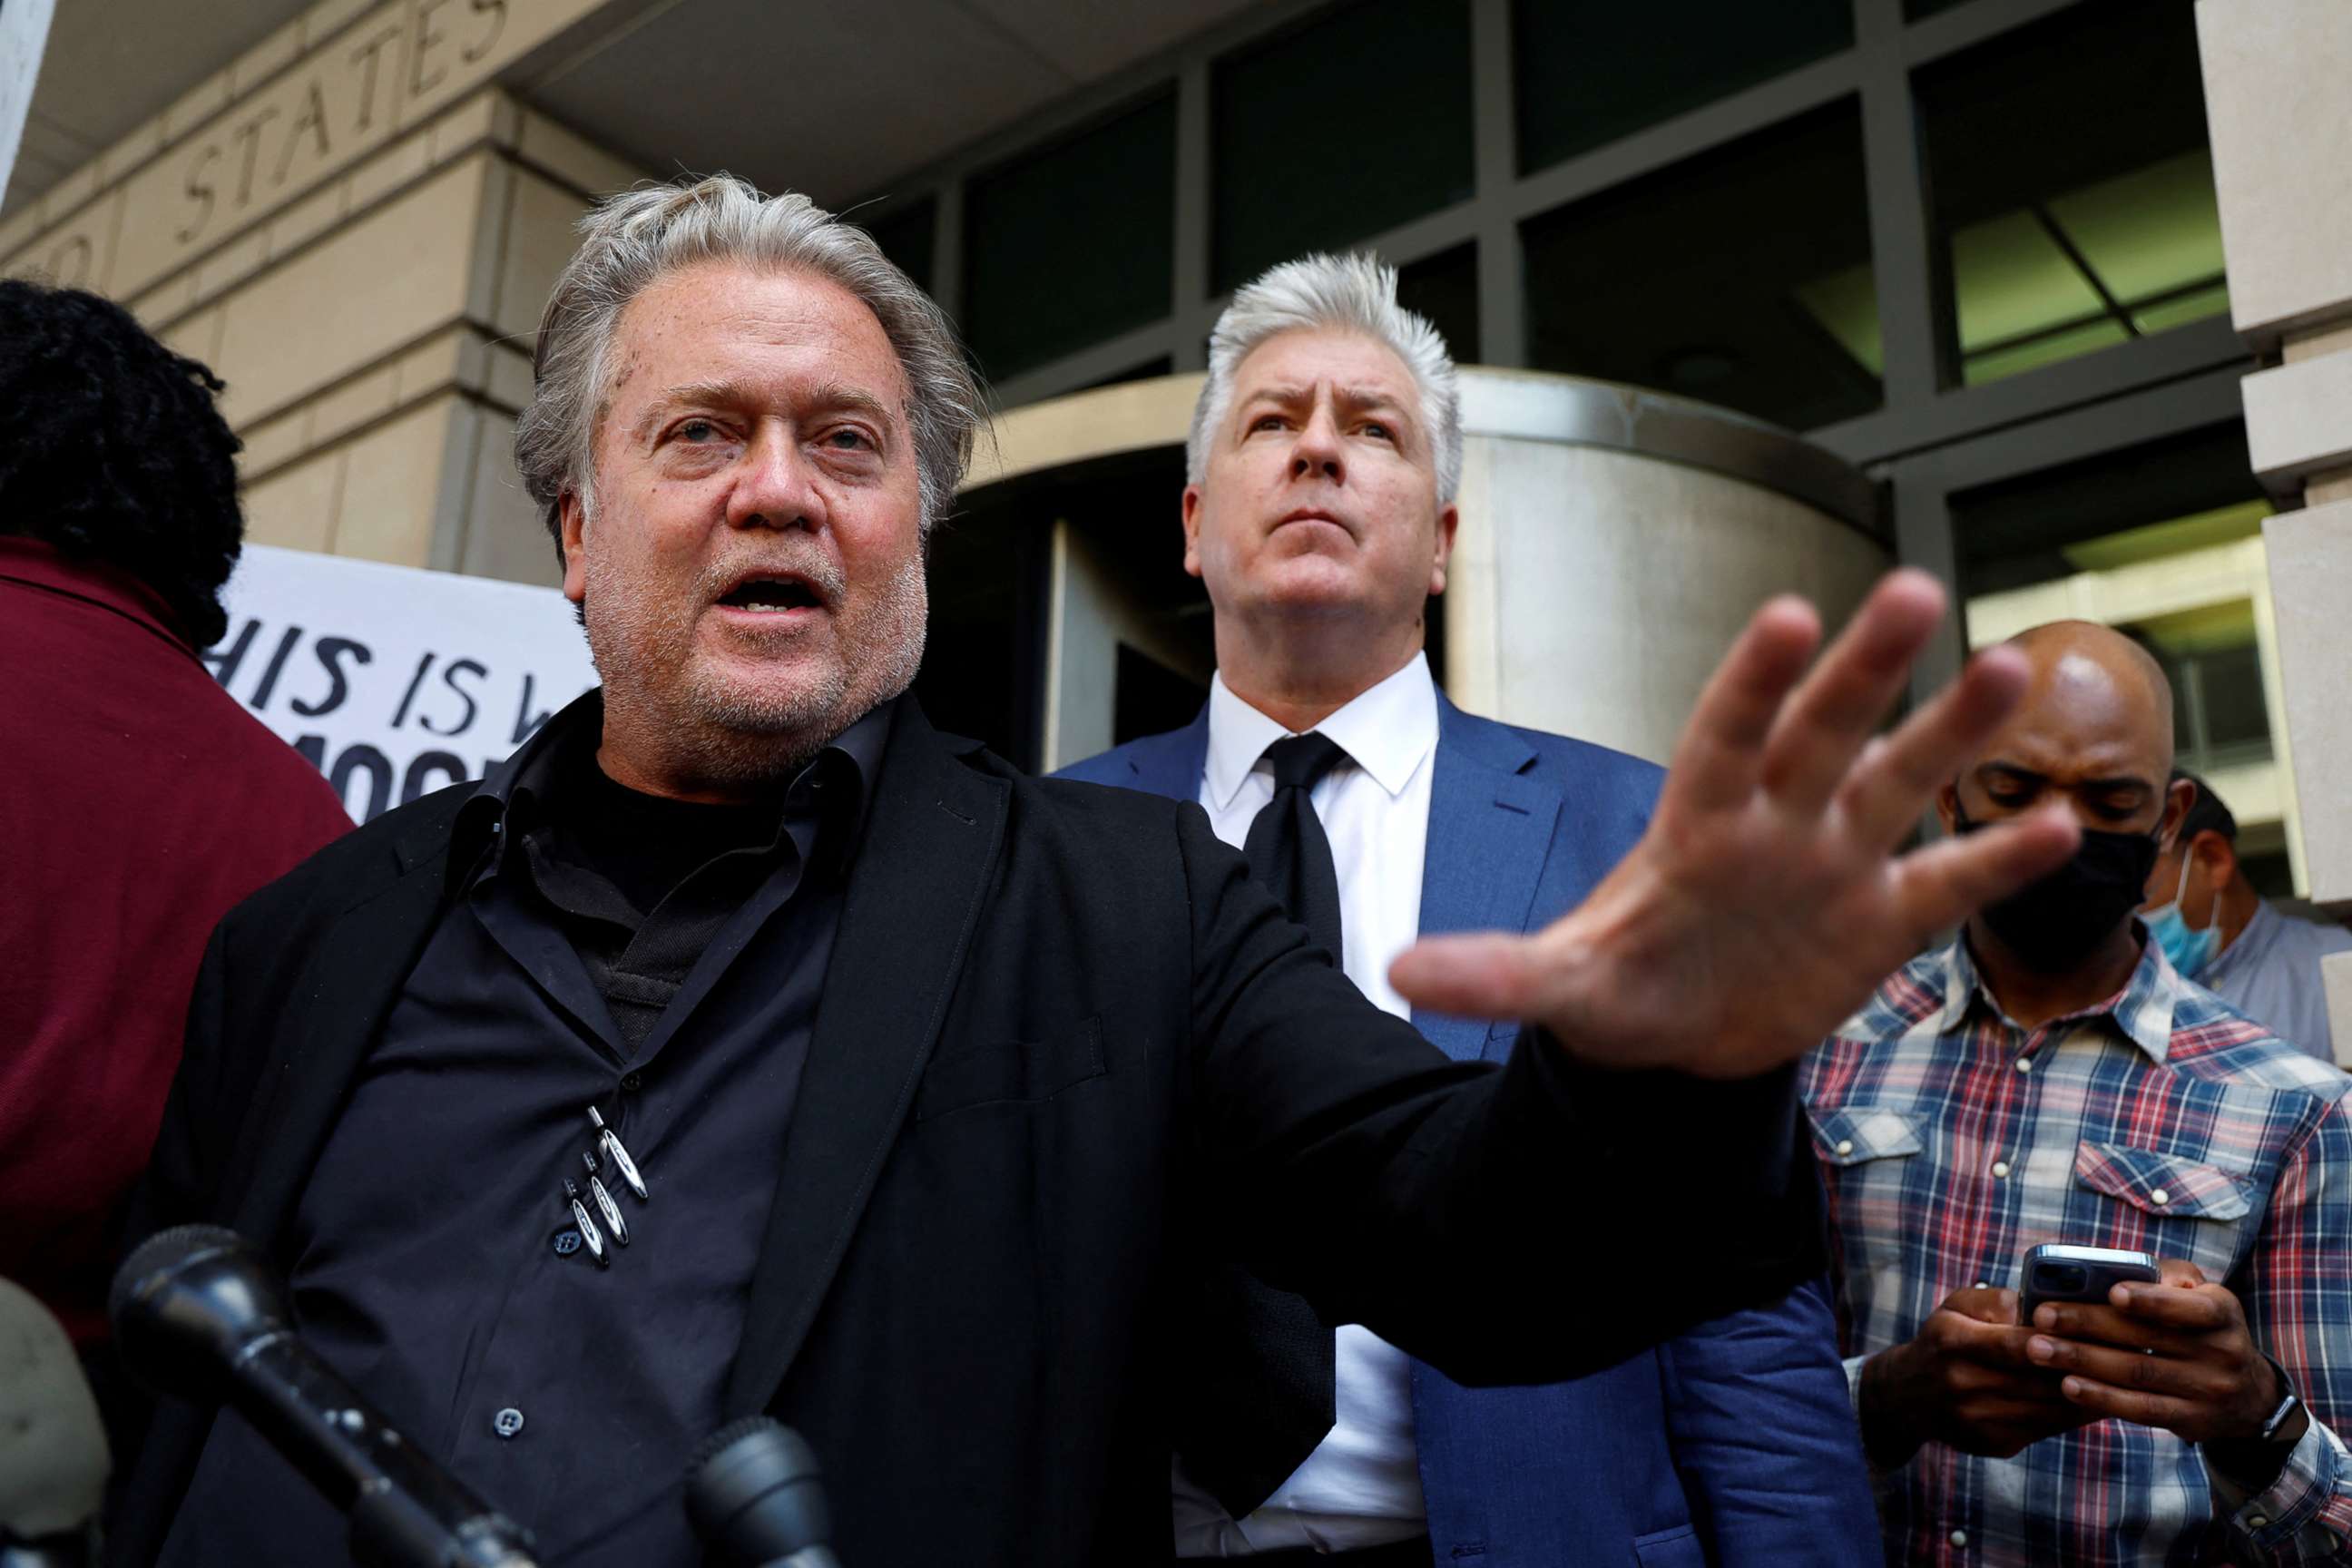 PHOTO: Former U.S. President Donald Trump's White House chief strategist Steve Bannon speaks to the media as he departs after he was found guilty during his trial on contempt of Congress charges, at U.S. District Court in Washington, D.C., July 22, 2022.